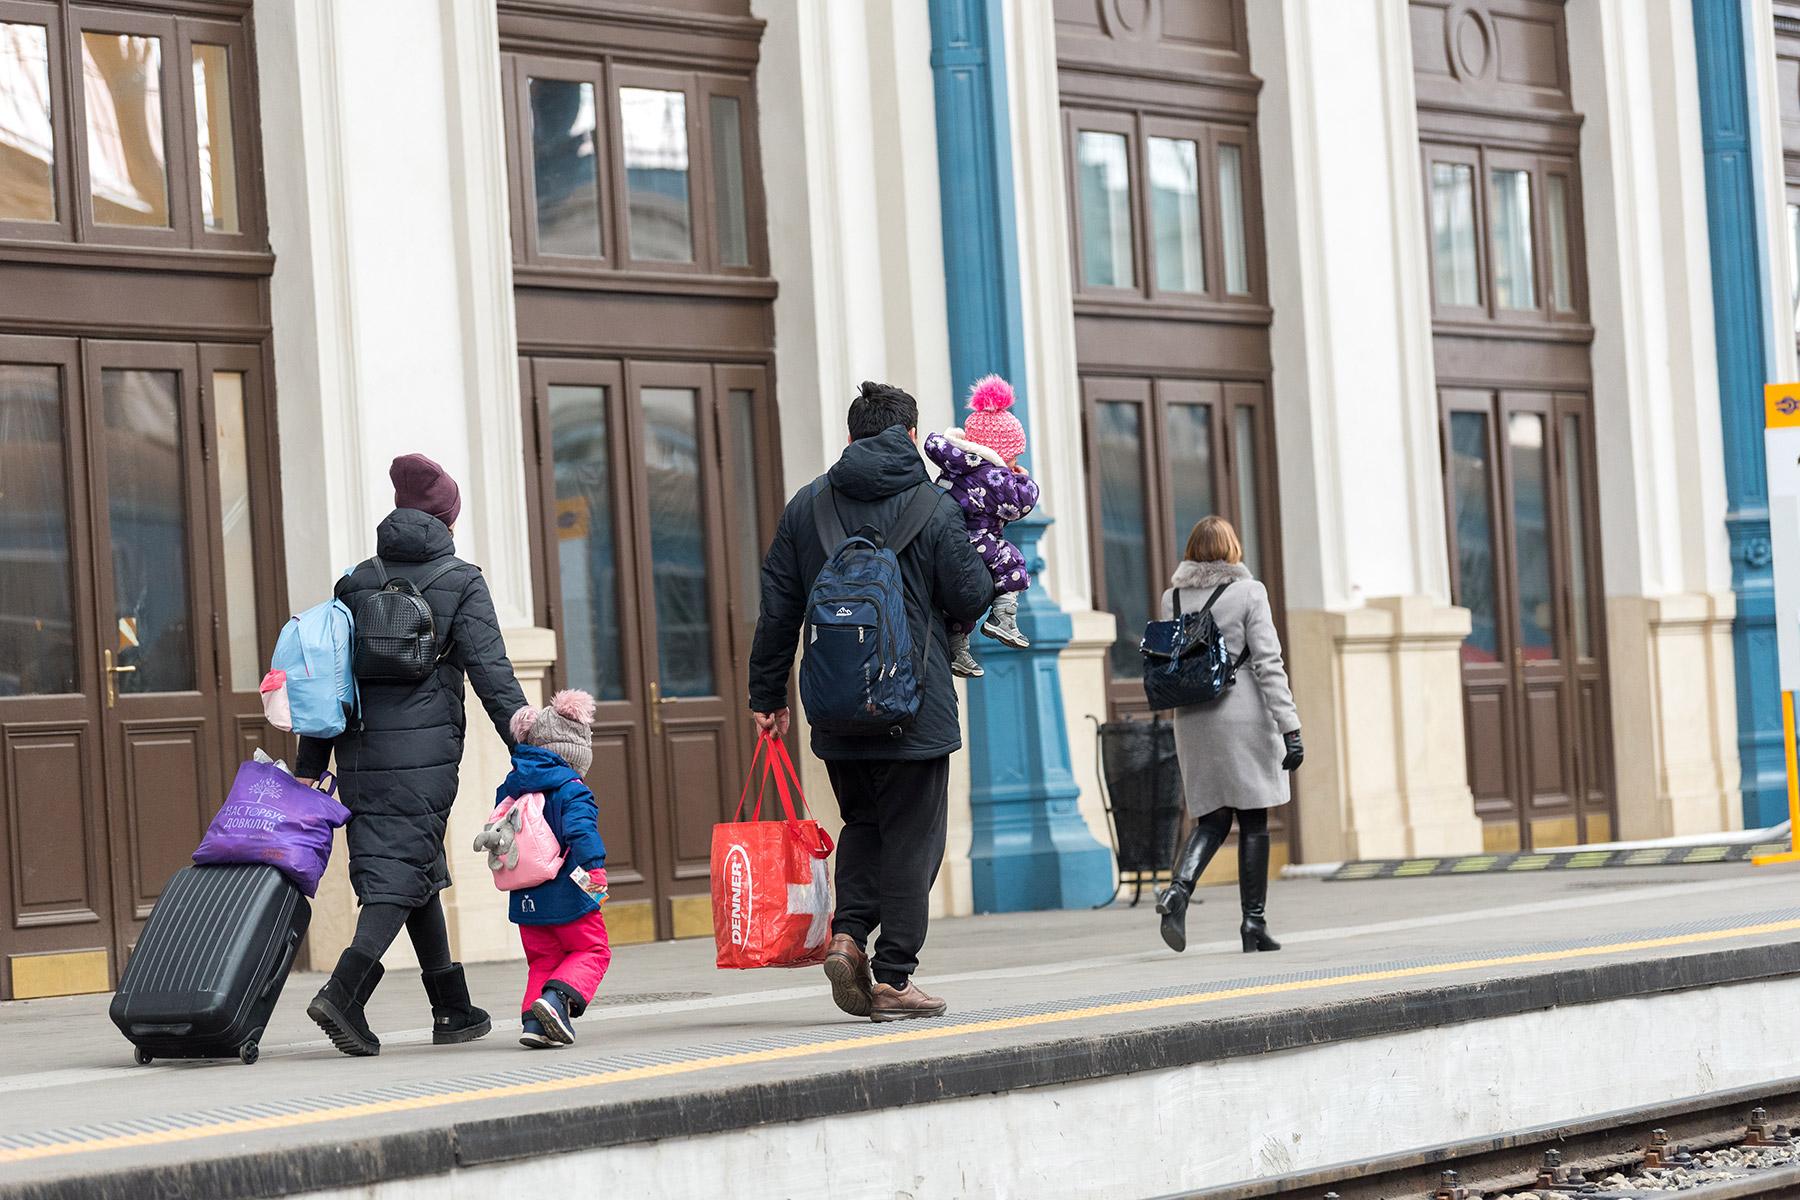 Refugees arrive at the train station in northeast Hungary after crossing the border from Ukraine. Photo: LWF/Albin Hillert